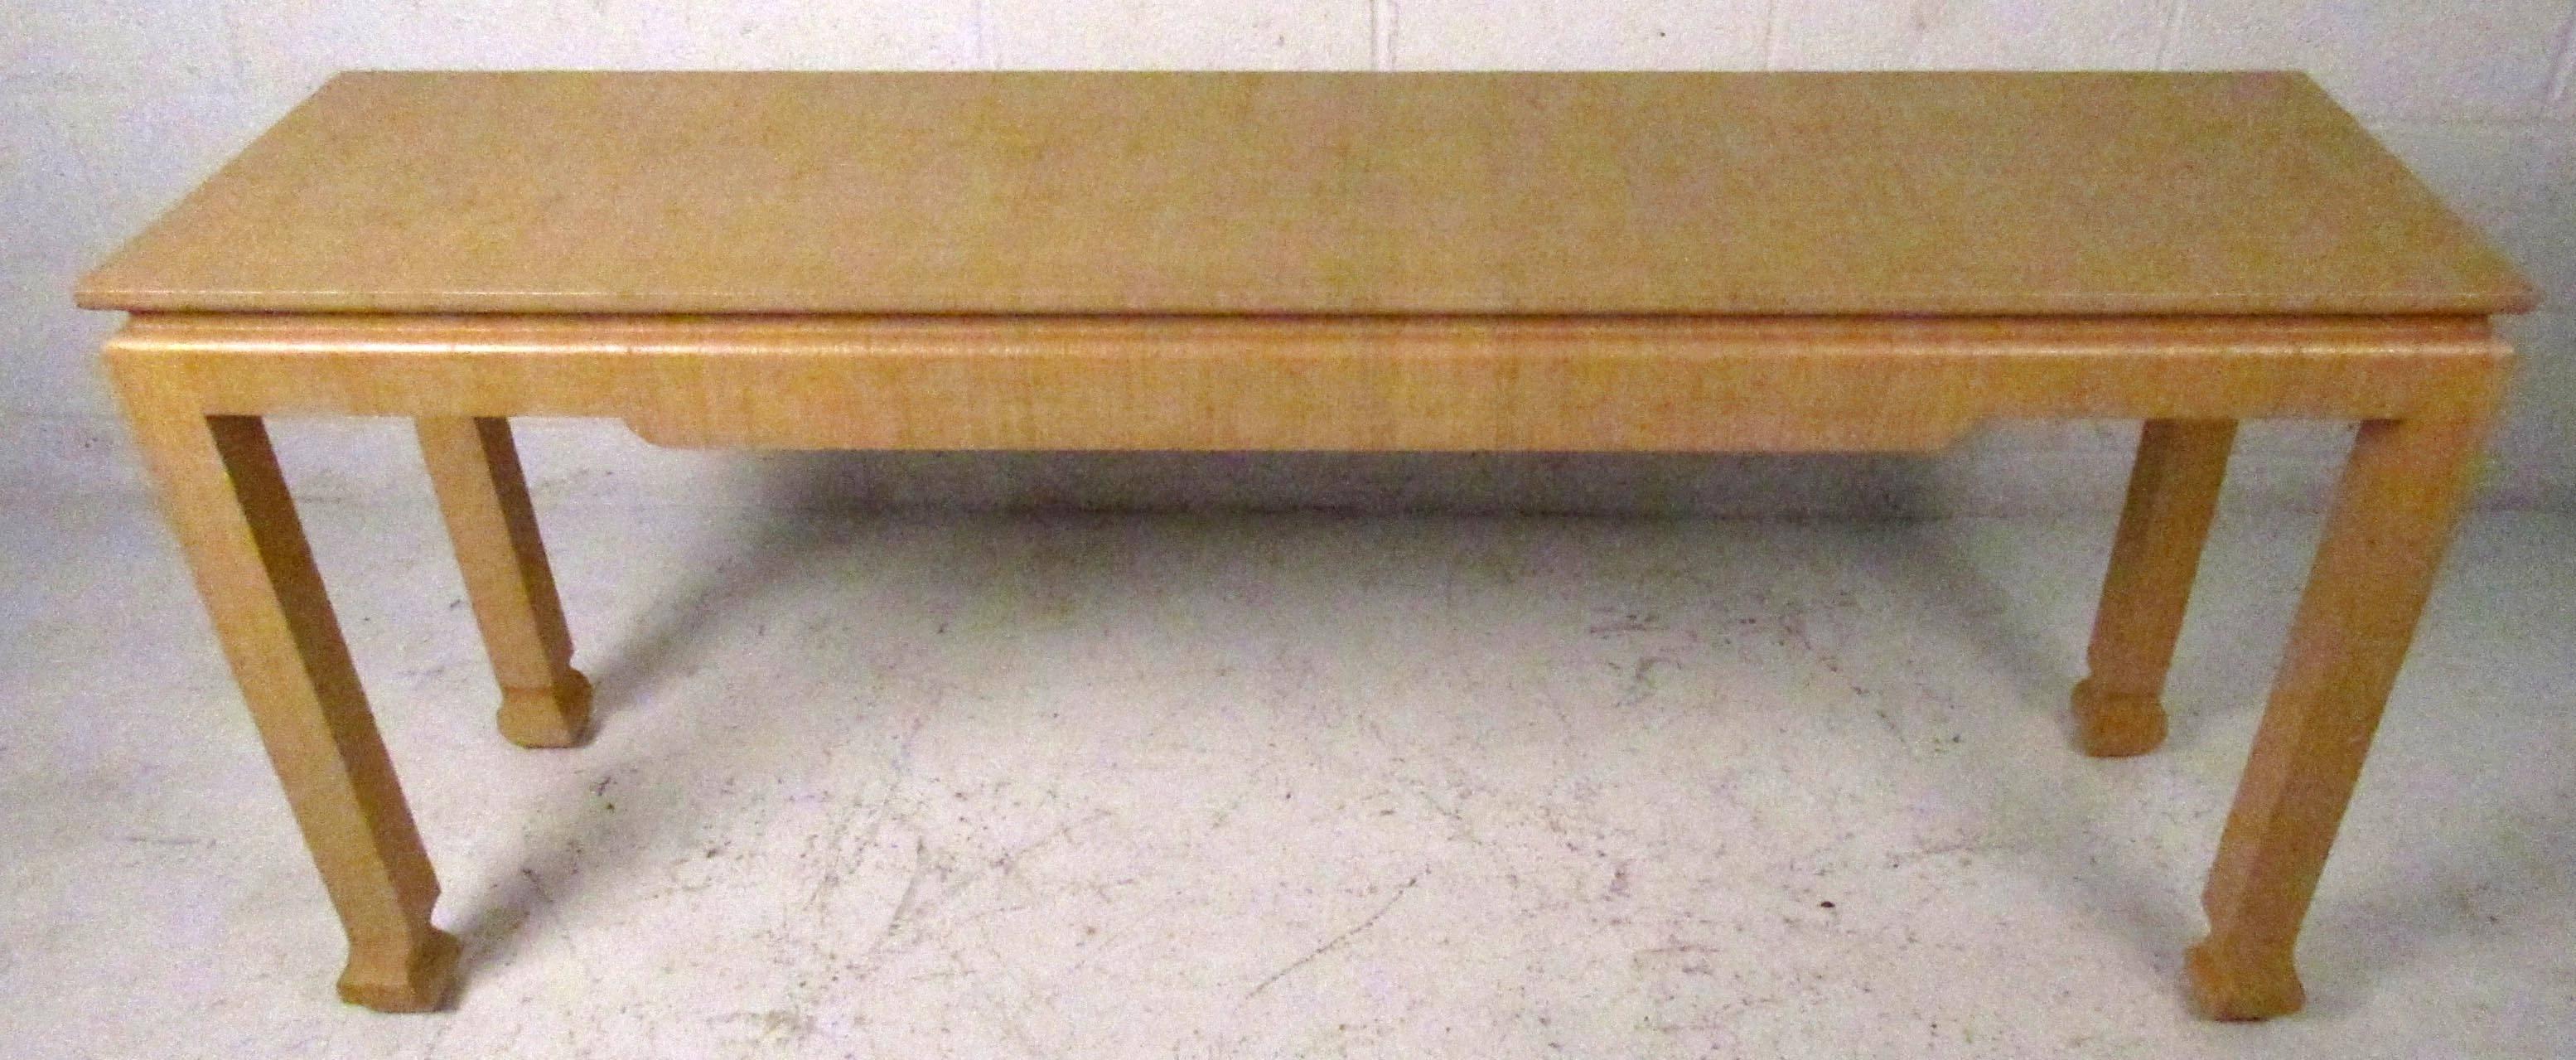 Vintage-modern console table, features sculpted base and grass cloth finish, designed in the manner of Karl Springer.

Please confirm item location NY or NJ with dealer.